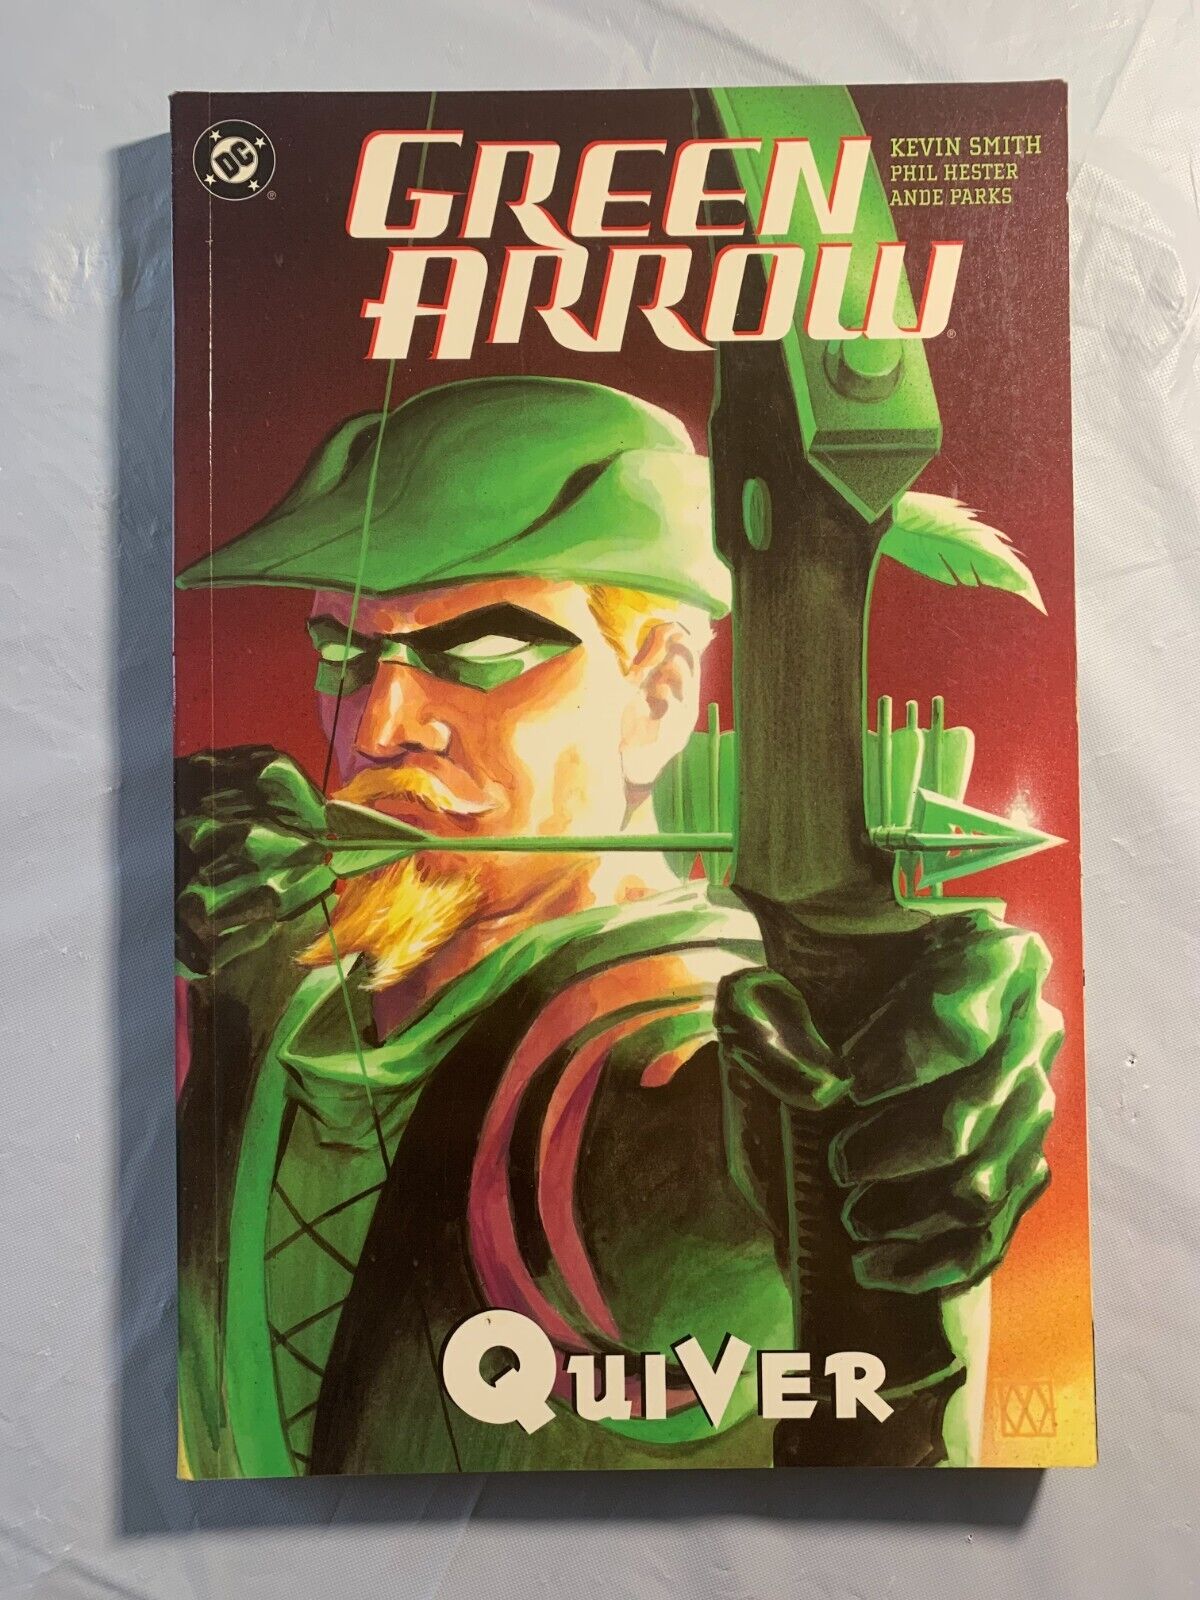 Green Arrow by Kevin Smith Vol 1 Quiver TPB DC Comics 2003 - First Printing